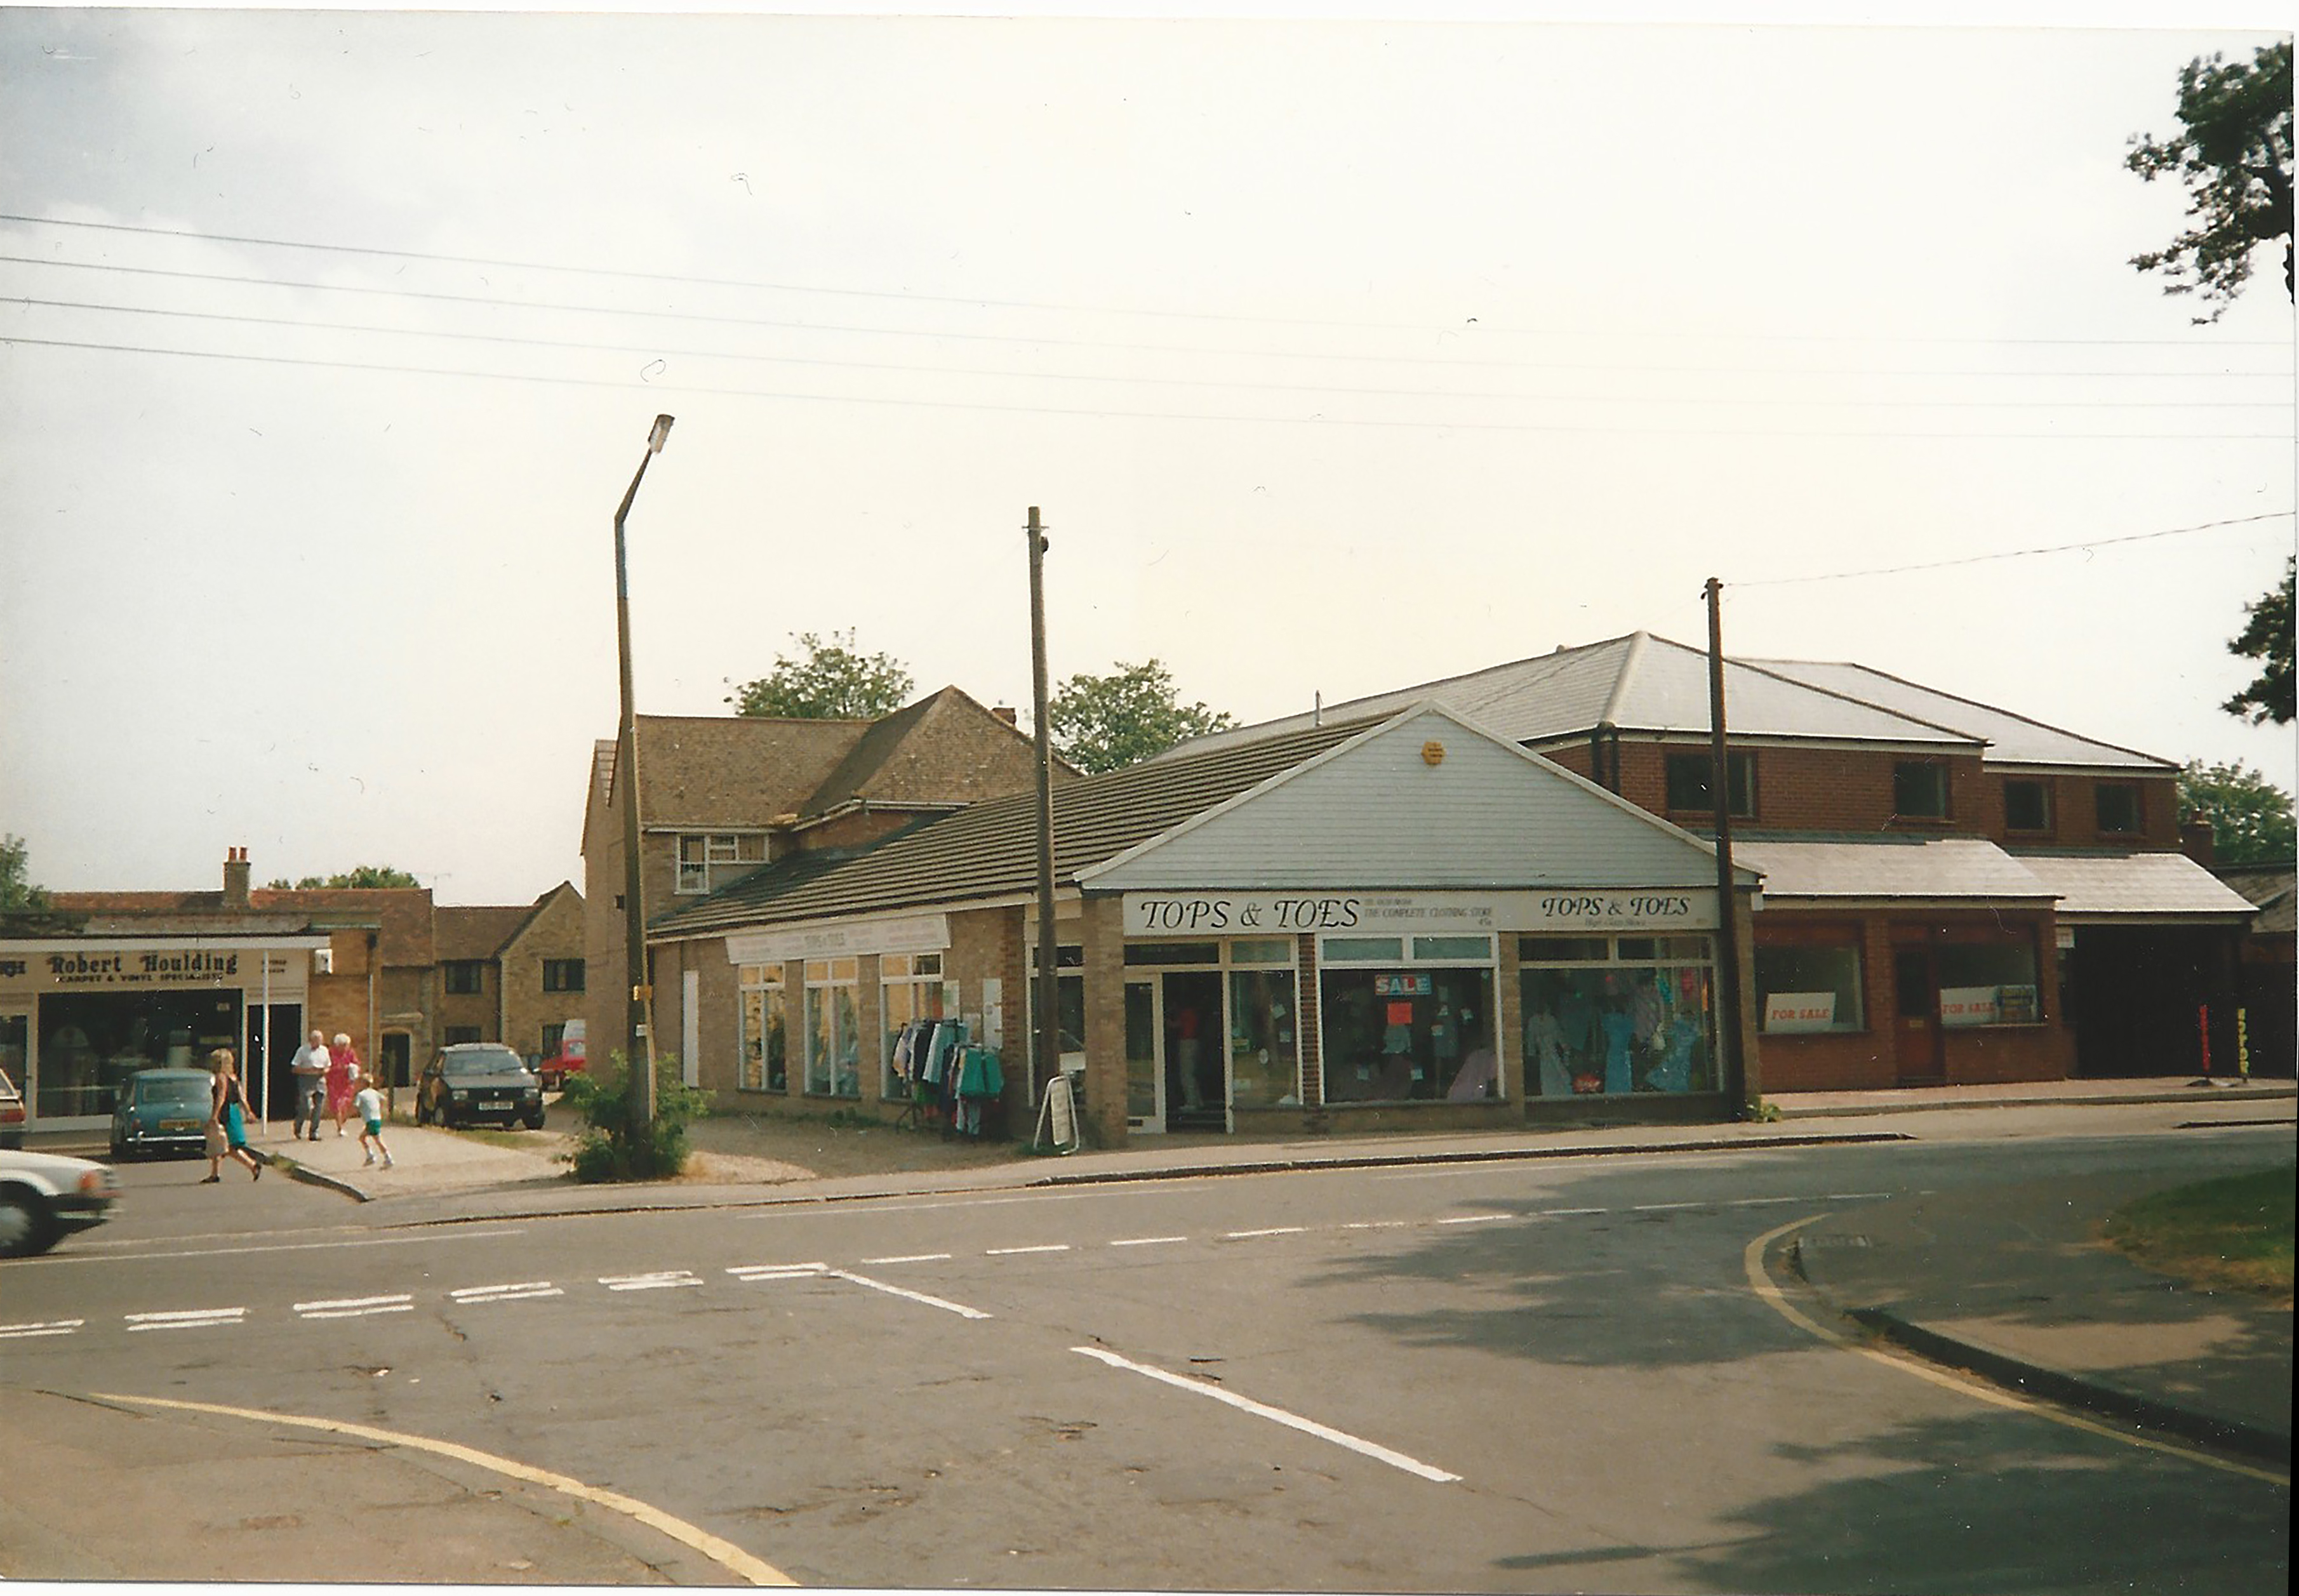 Image of Tops & Toes in late 80s